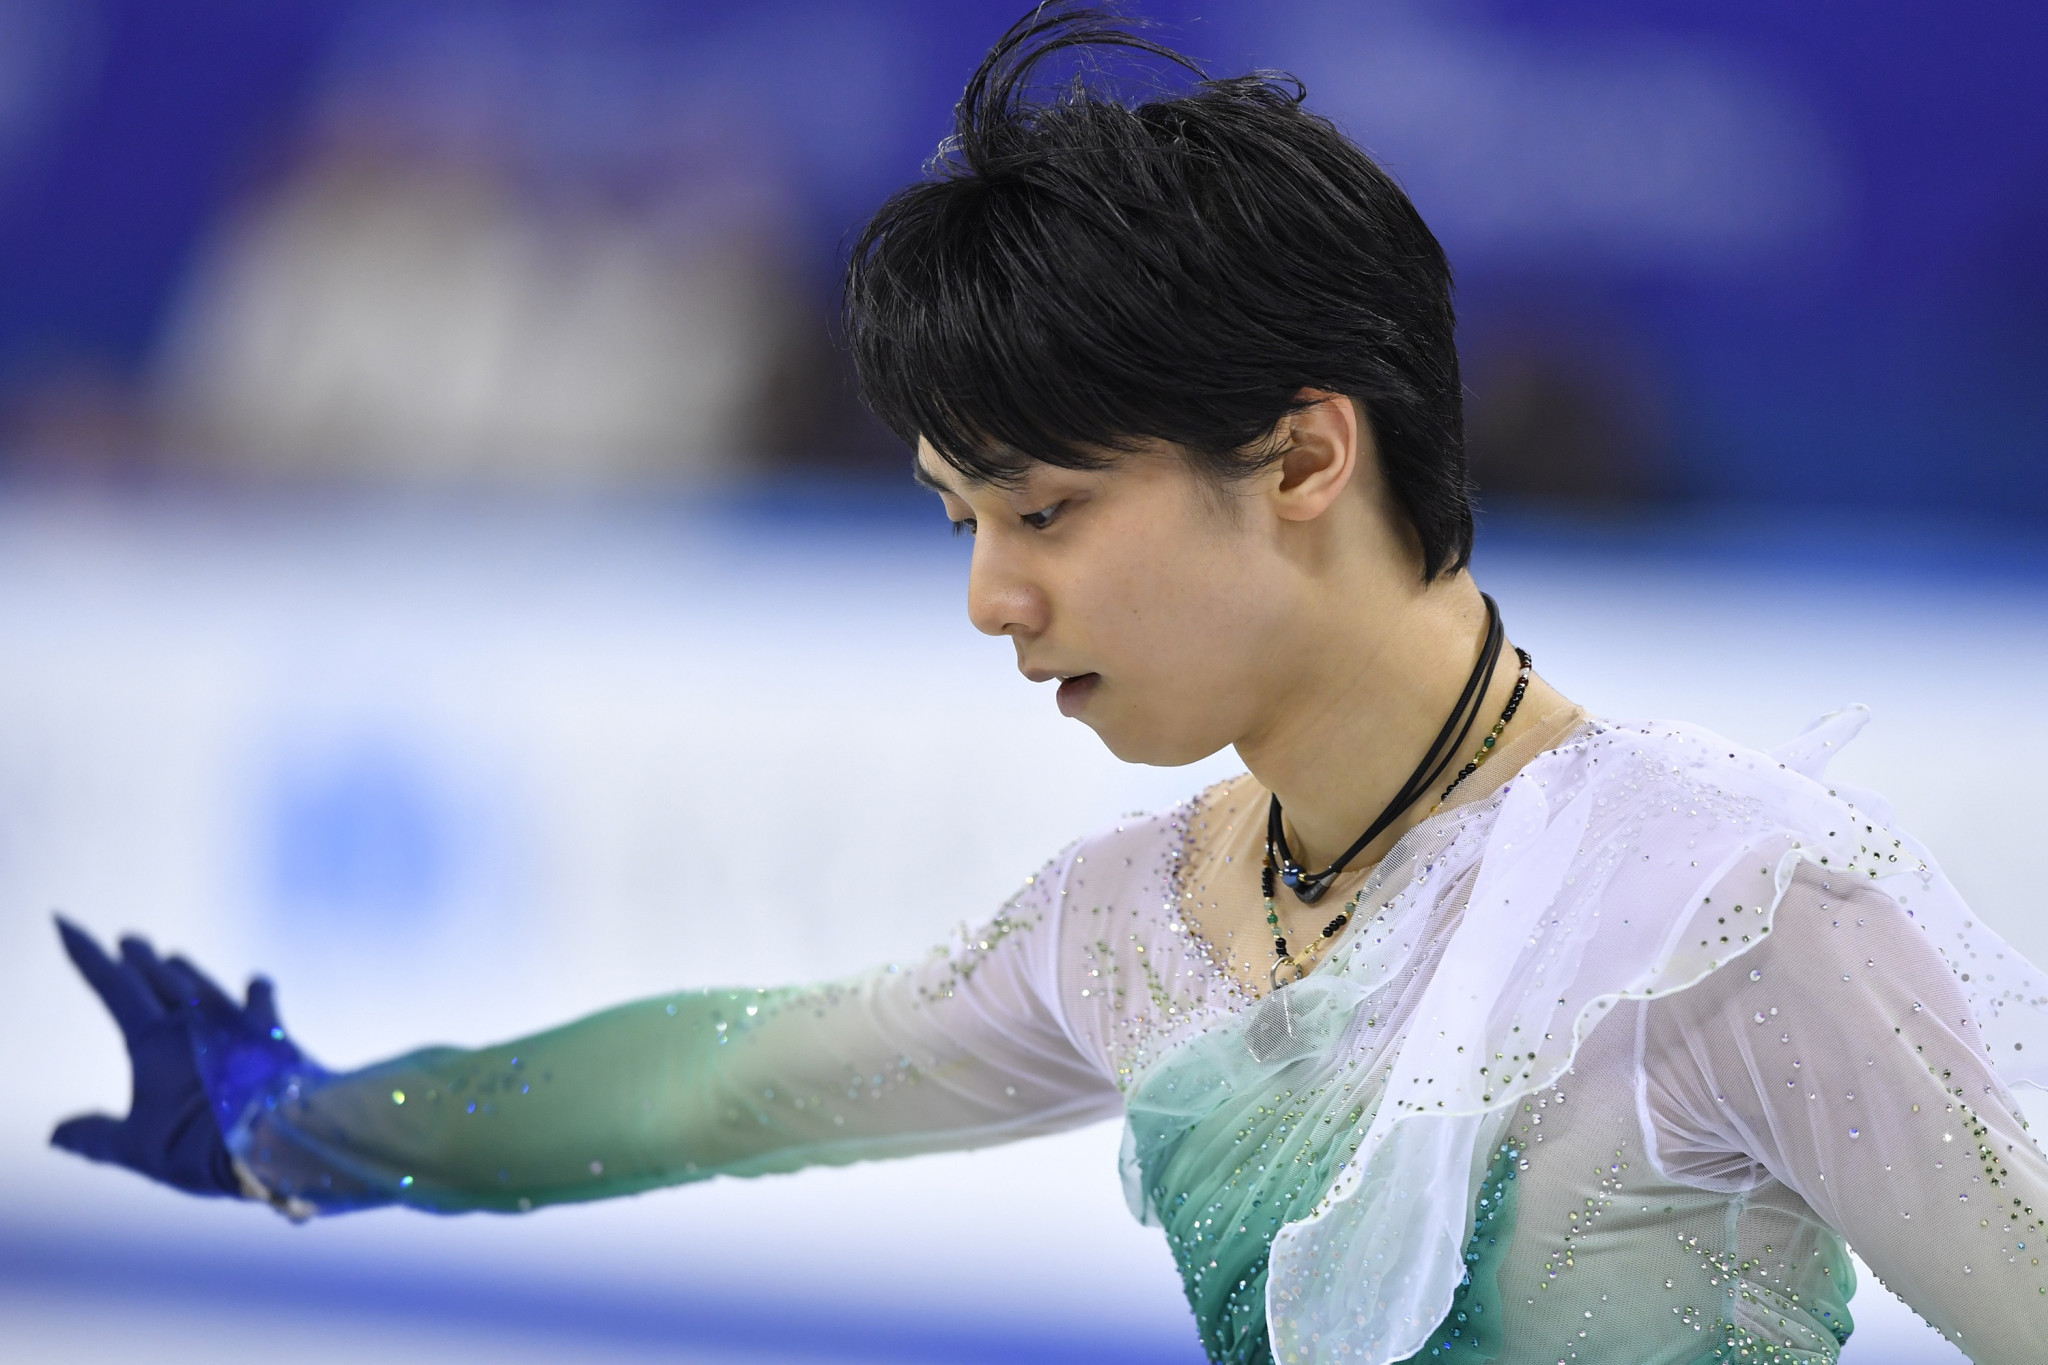 Reigning Olympic and world champion Yuzuru Hanyu's participation is now in doubt at the ISU Grand Prix of Figure Skating event in the Japanese city of Osaka ©Getty Images